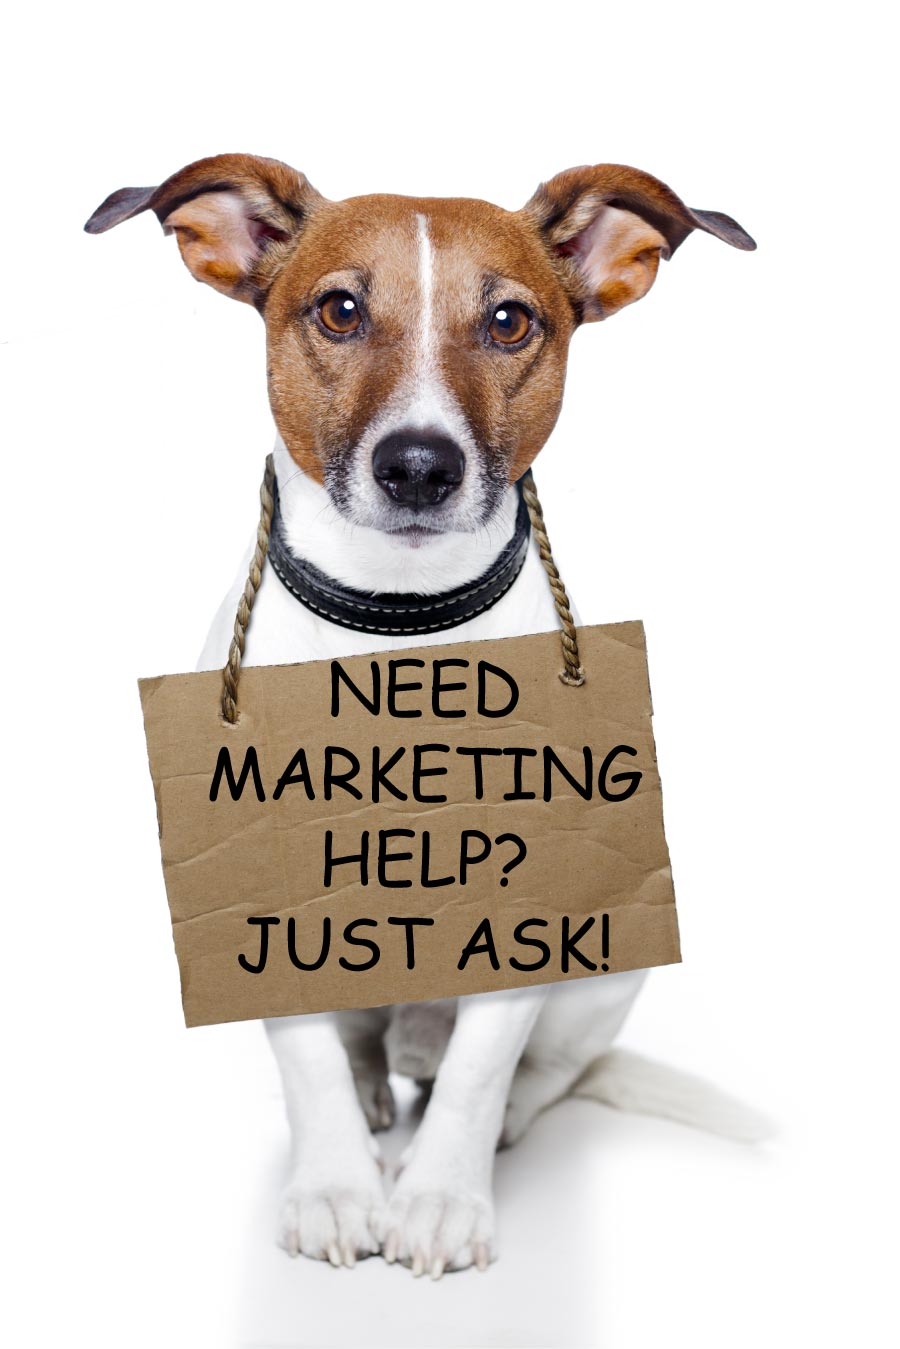 Need amrketing Help? Just ask